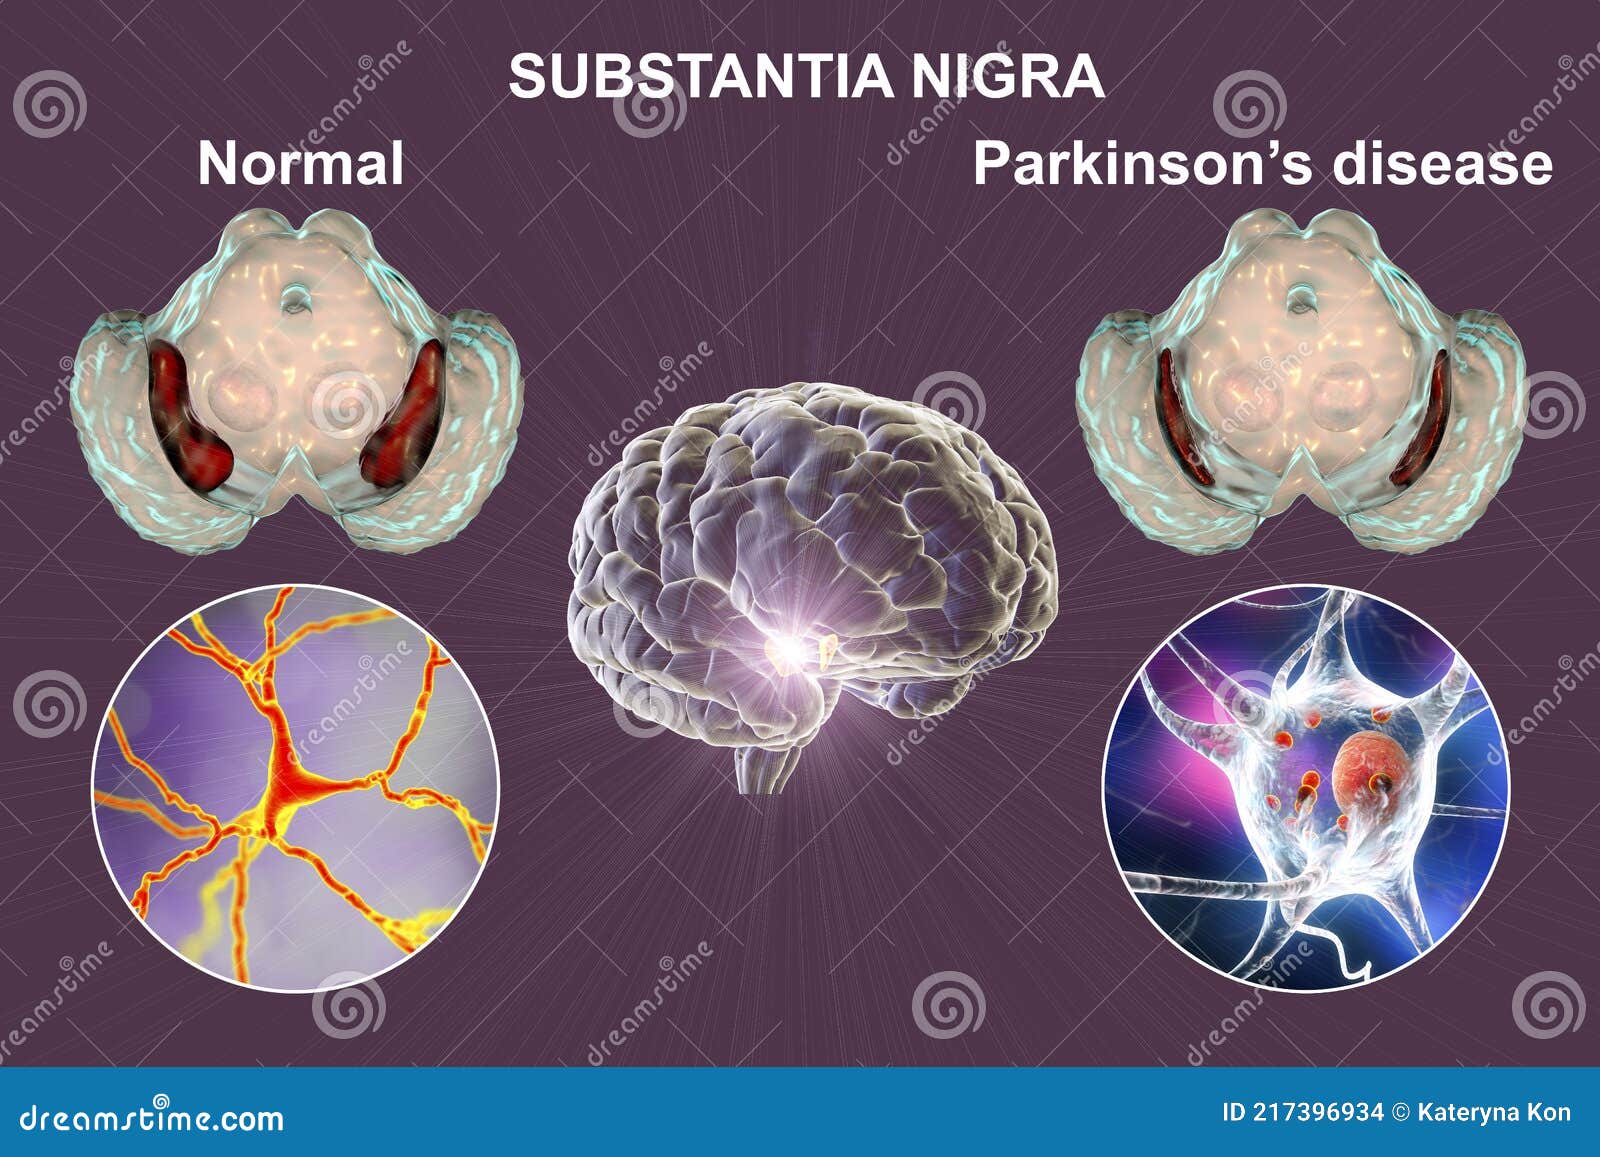 substantia nigra of the midbrain and its dopaminergic neurons in normal state and in parkinson's disease, 3d